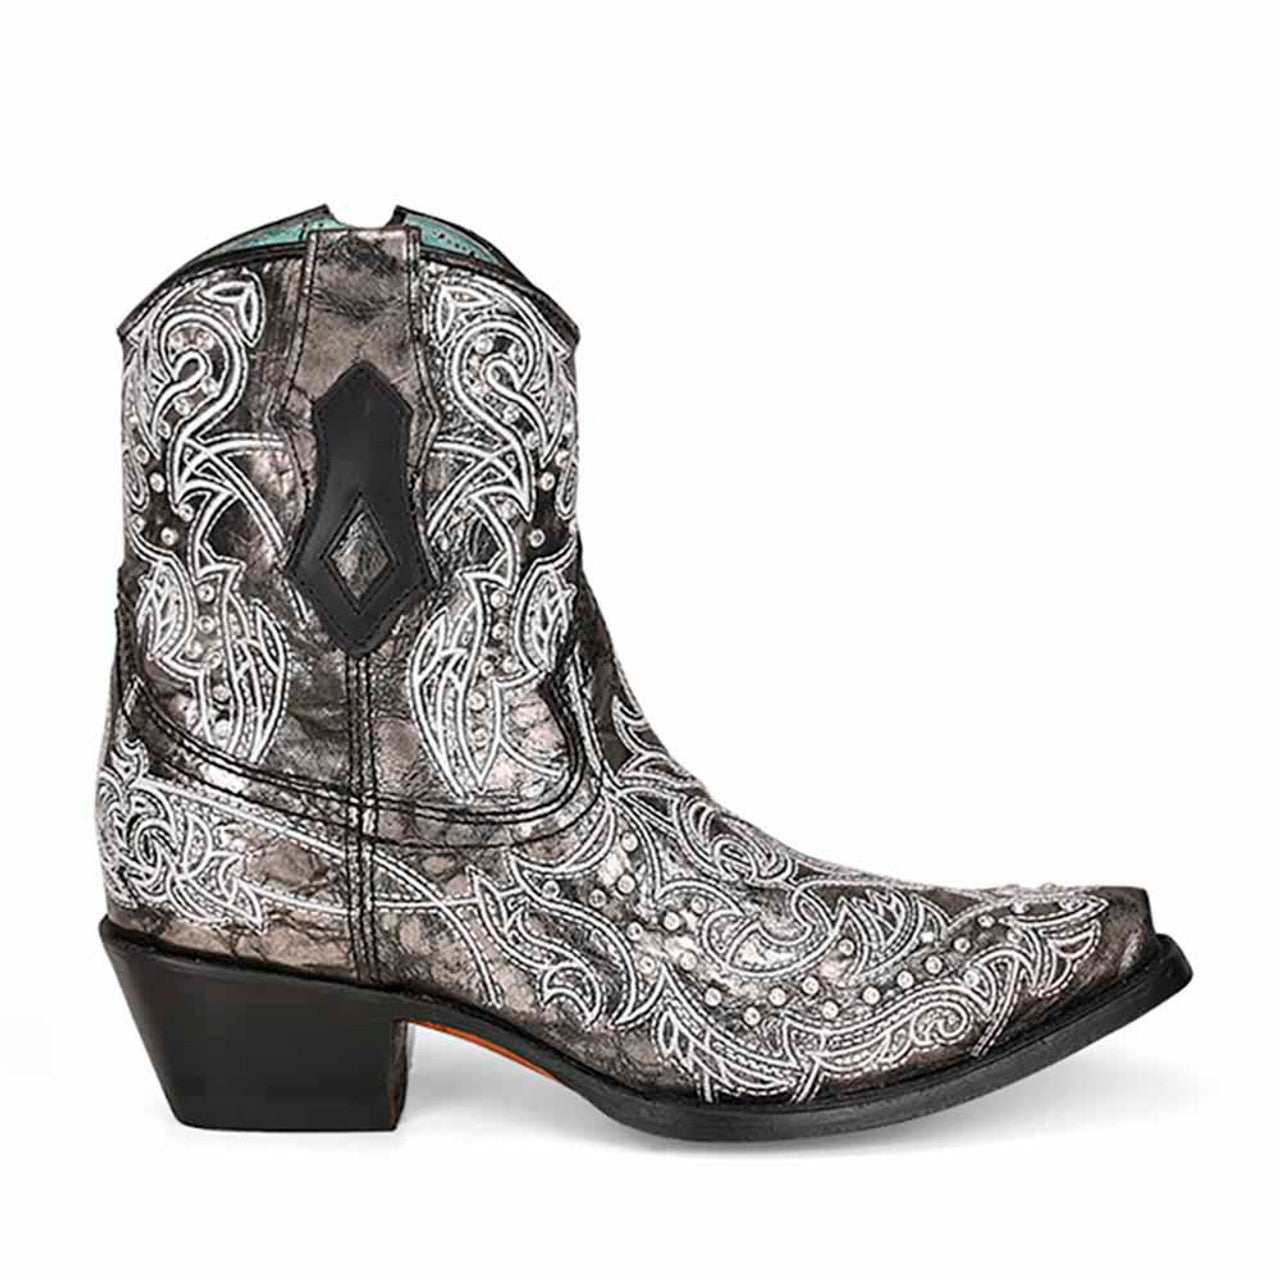 Corral Ladies Black w/ White Embroidery & Crystals Ankle Boots C3923